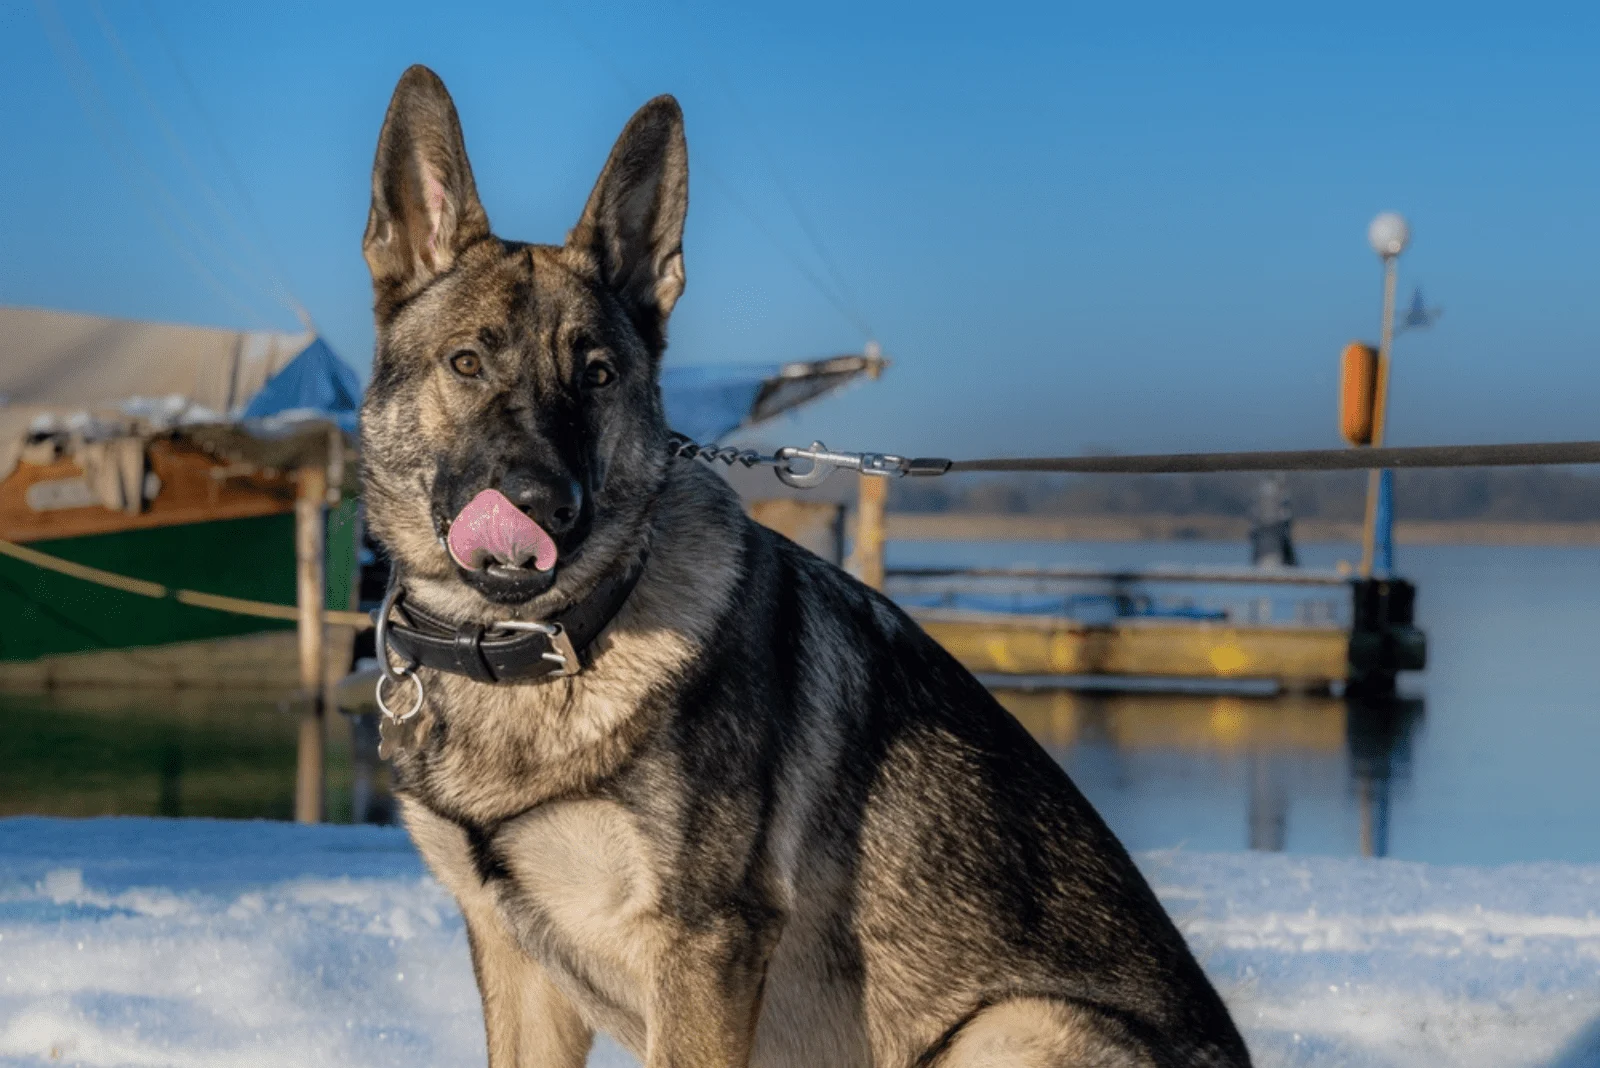 Sable German Shepherd sitting and looking at camera with tongue out